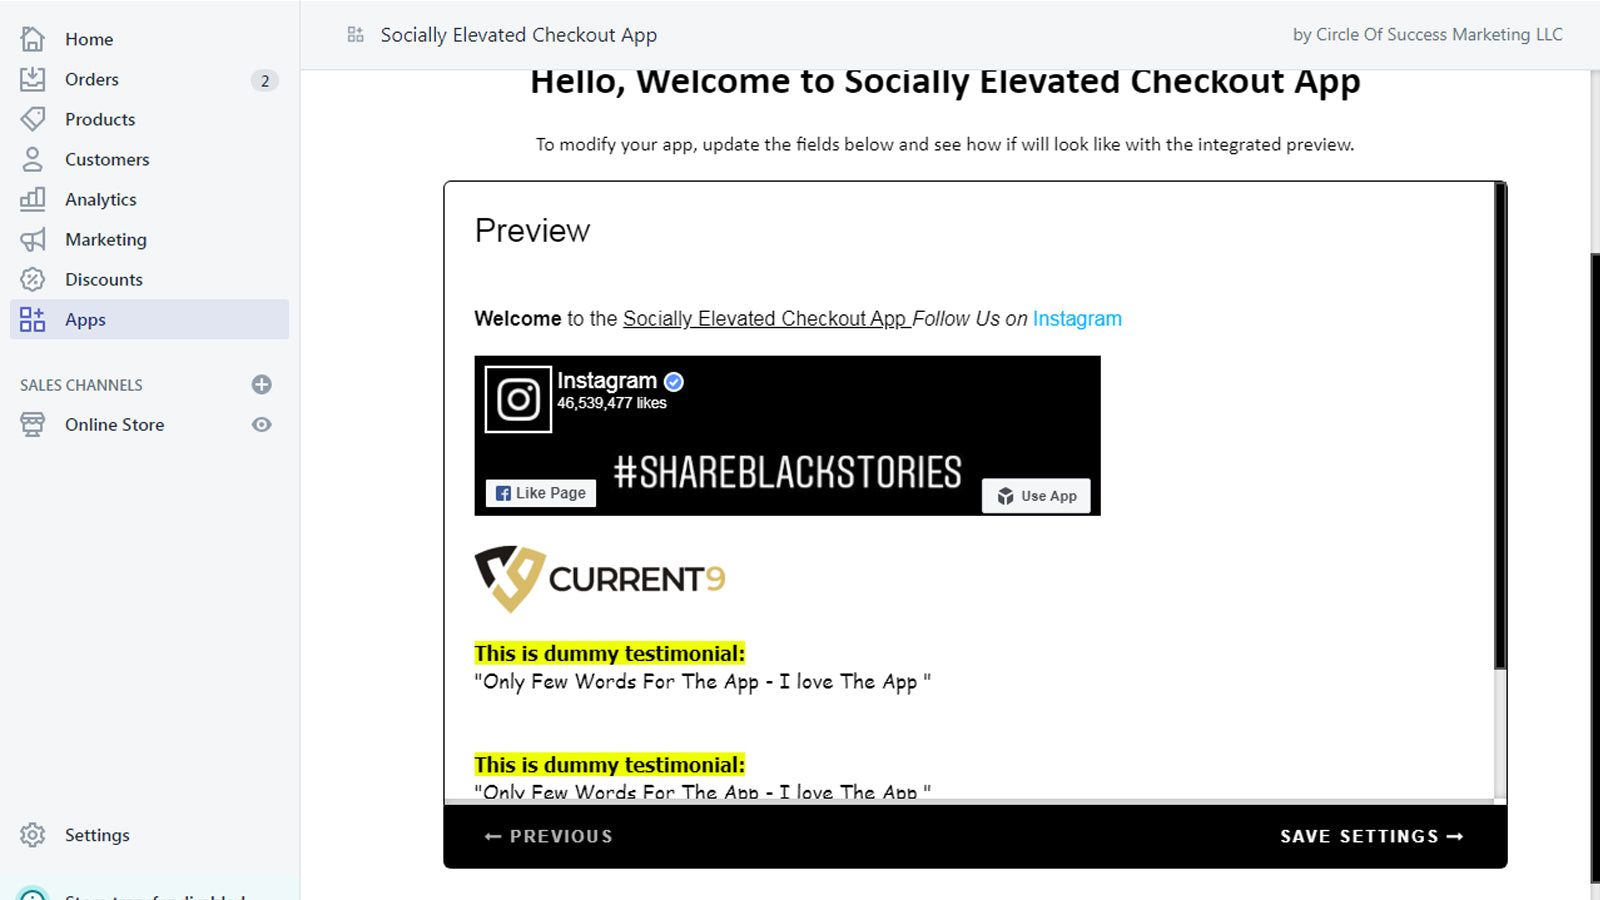 Socially Elevated Checkout App